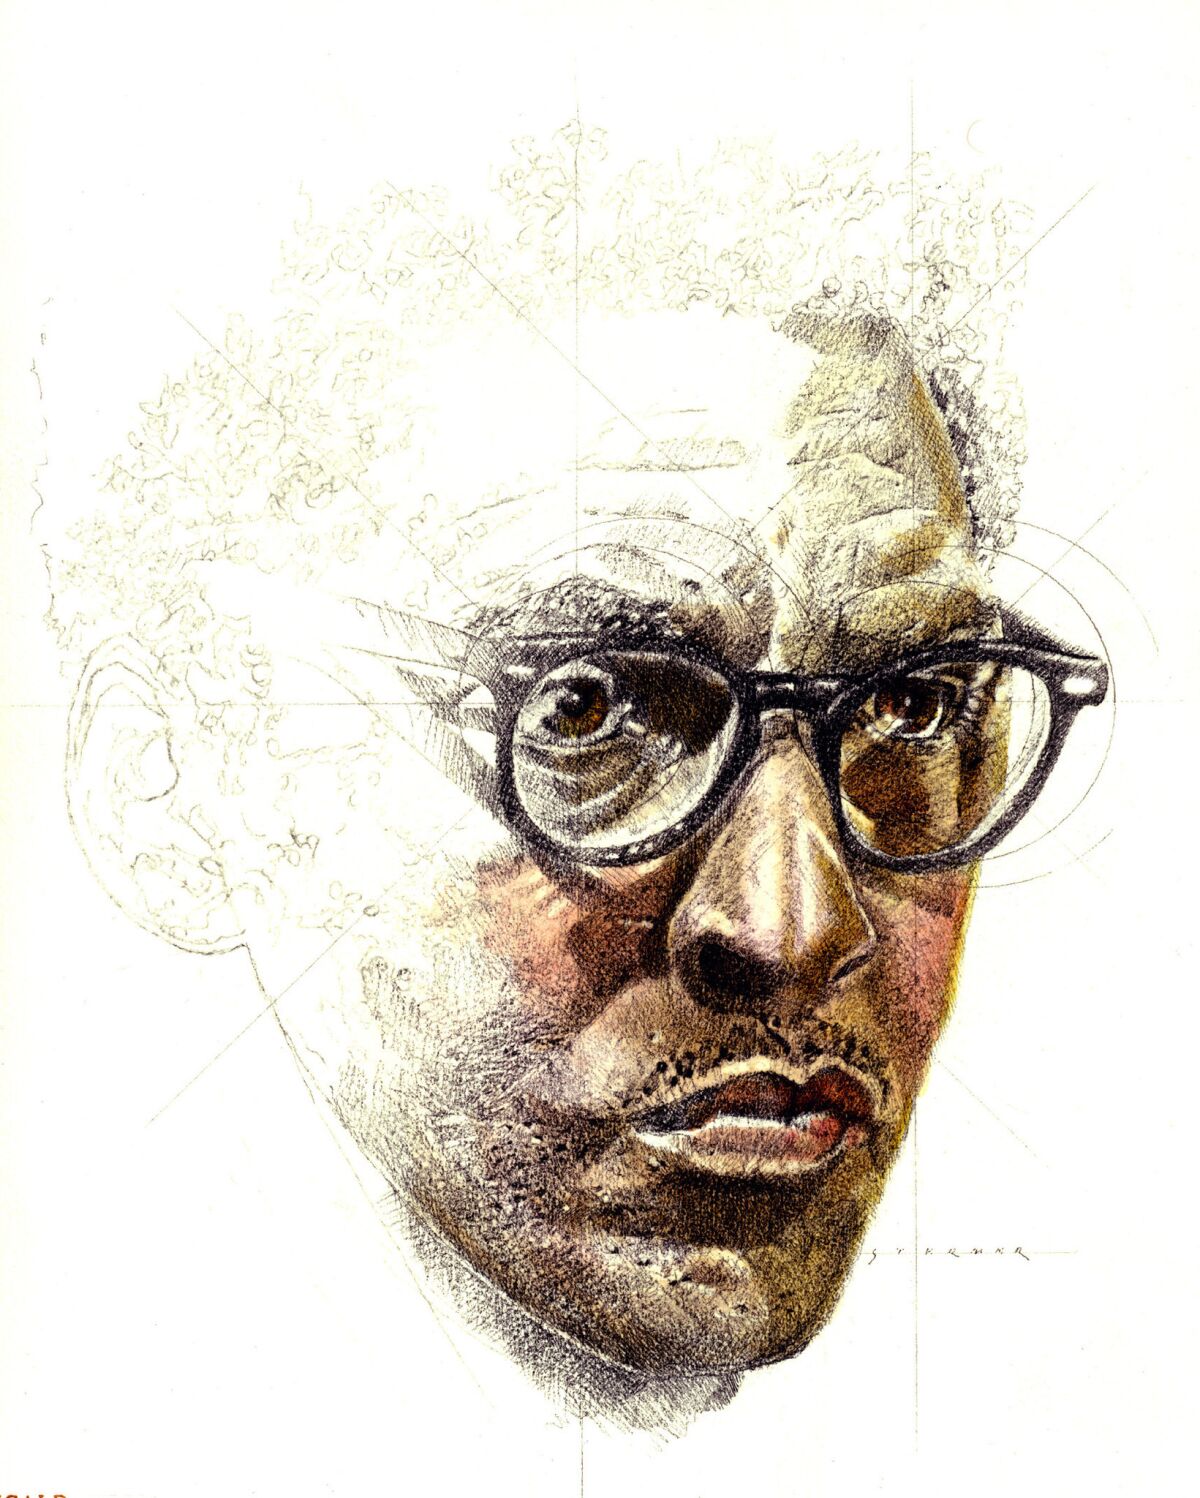 An illustration of Bayard Rustin, who was a mentor to Martin Luther King Jr.